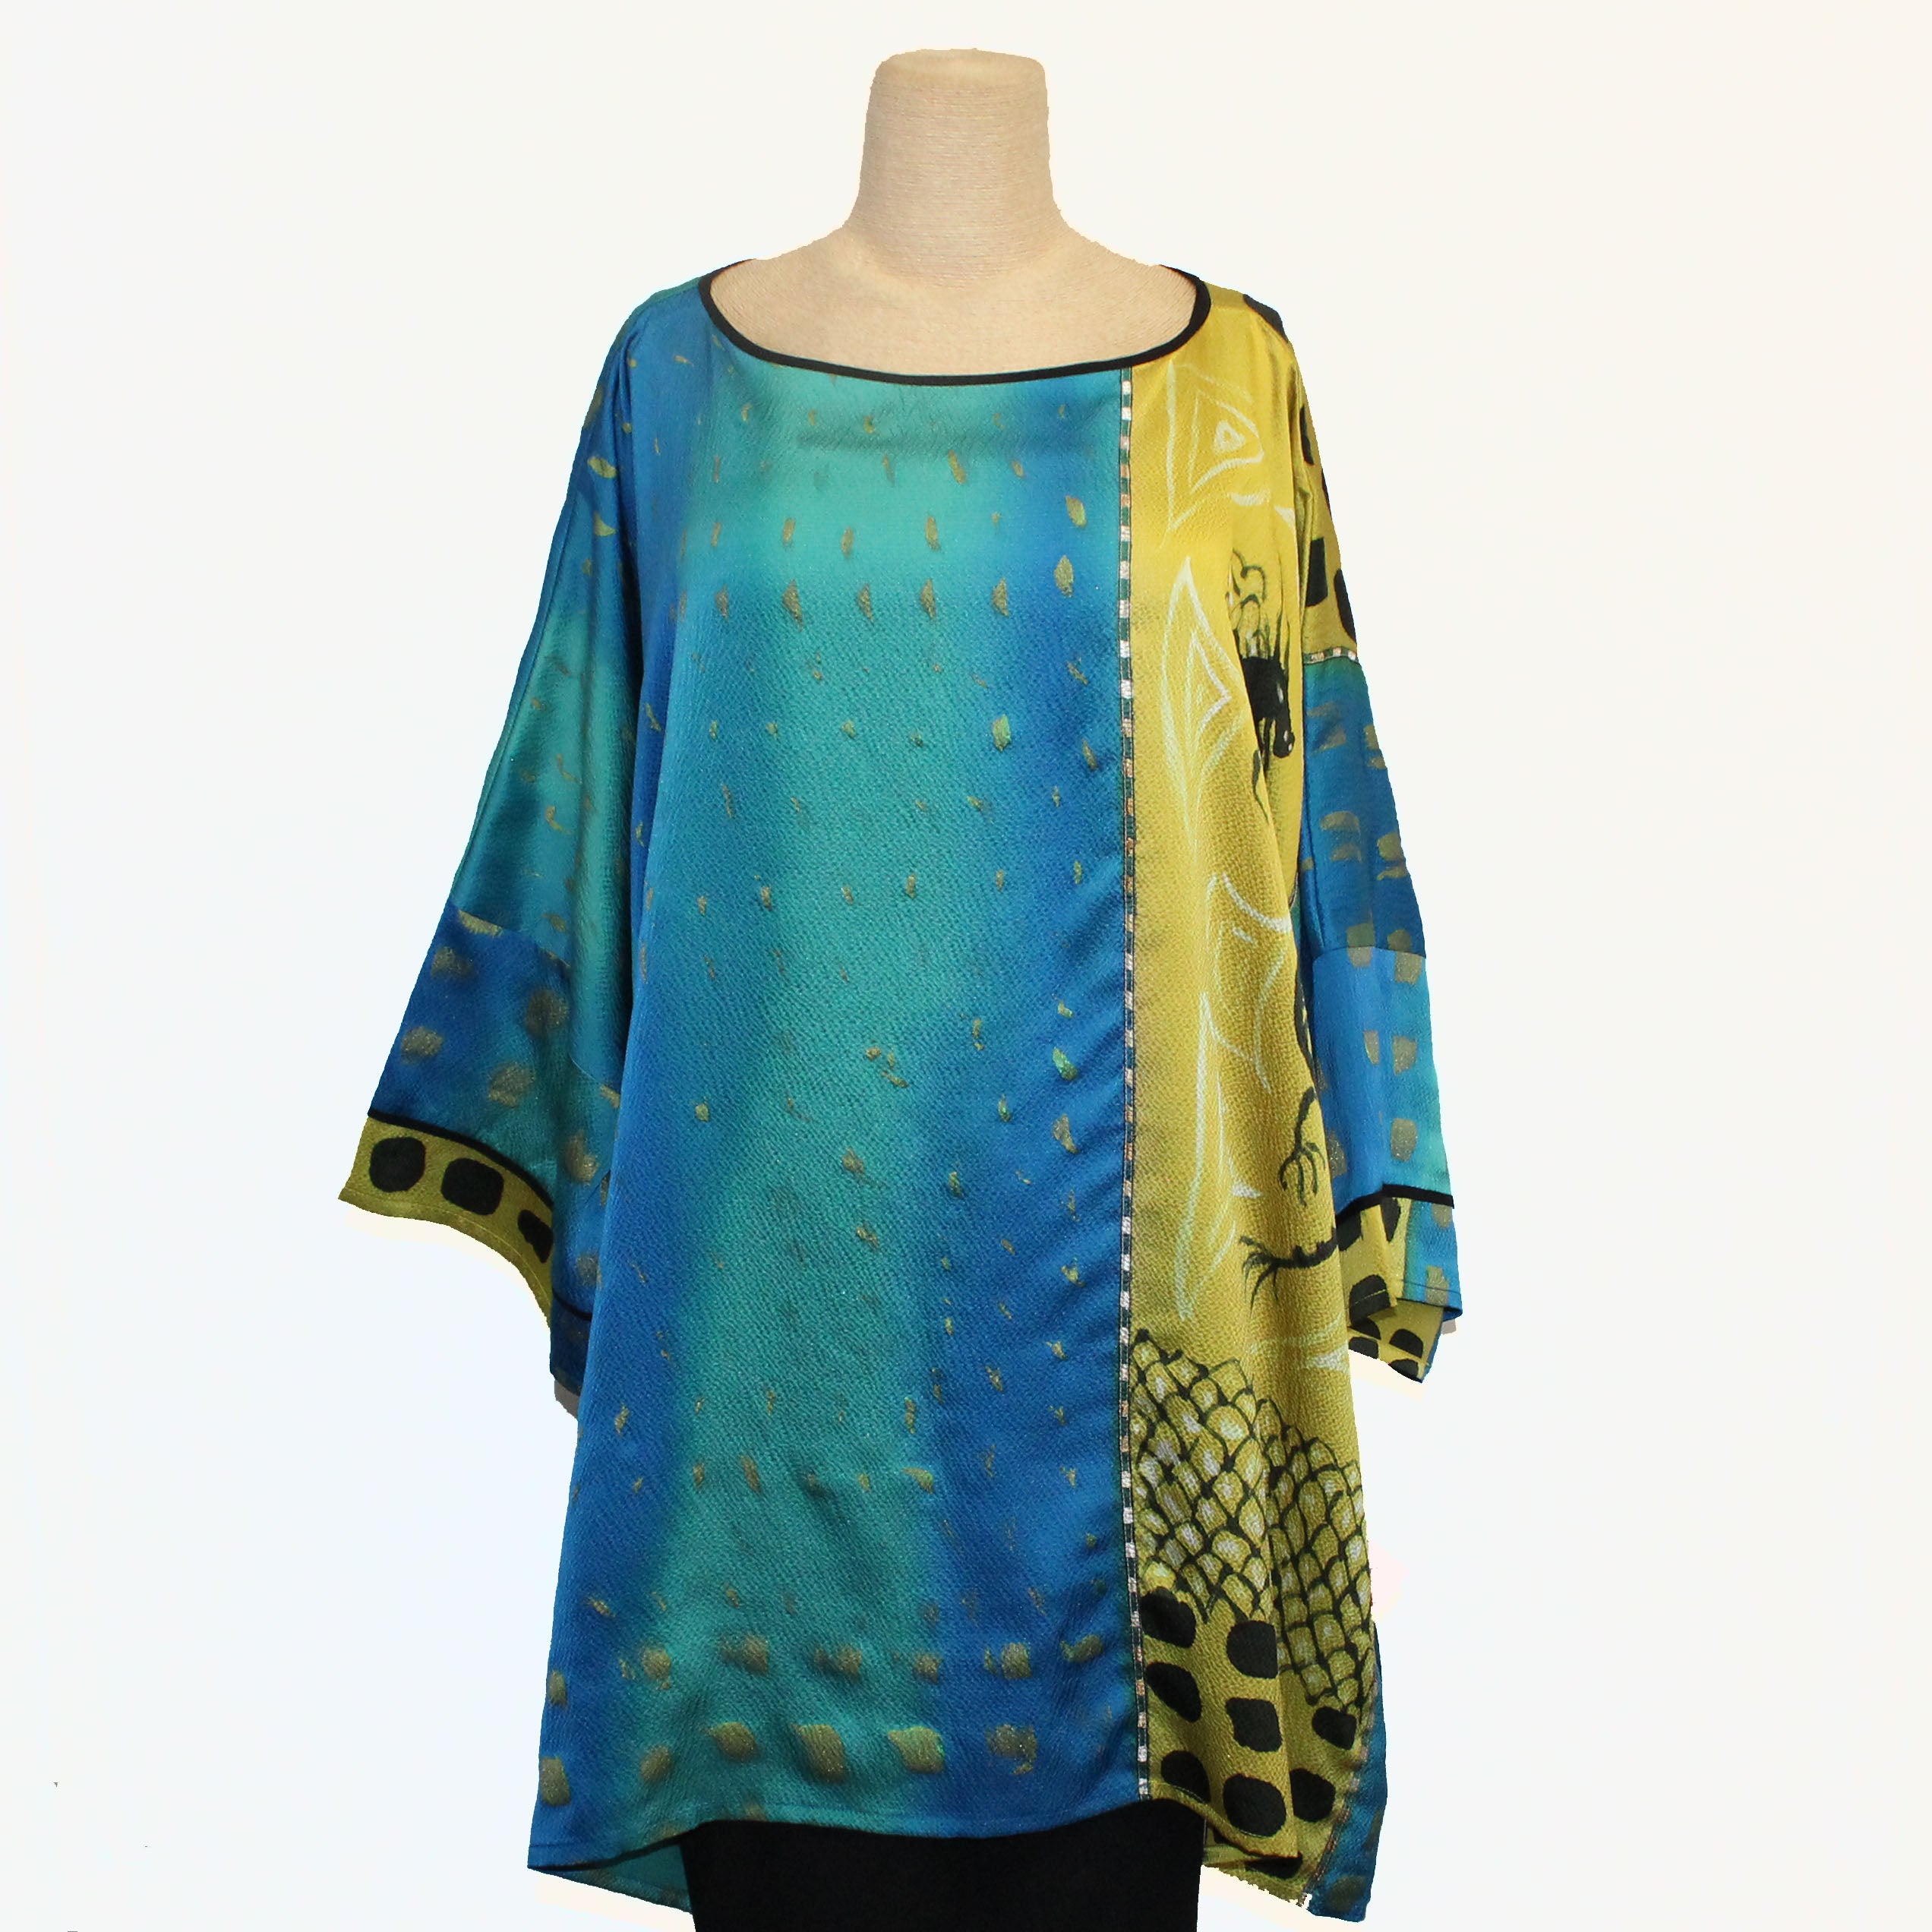 Catherine Bacon Pullover, "Dragon" Butterfly, Blue/Gold, OS